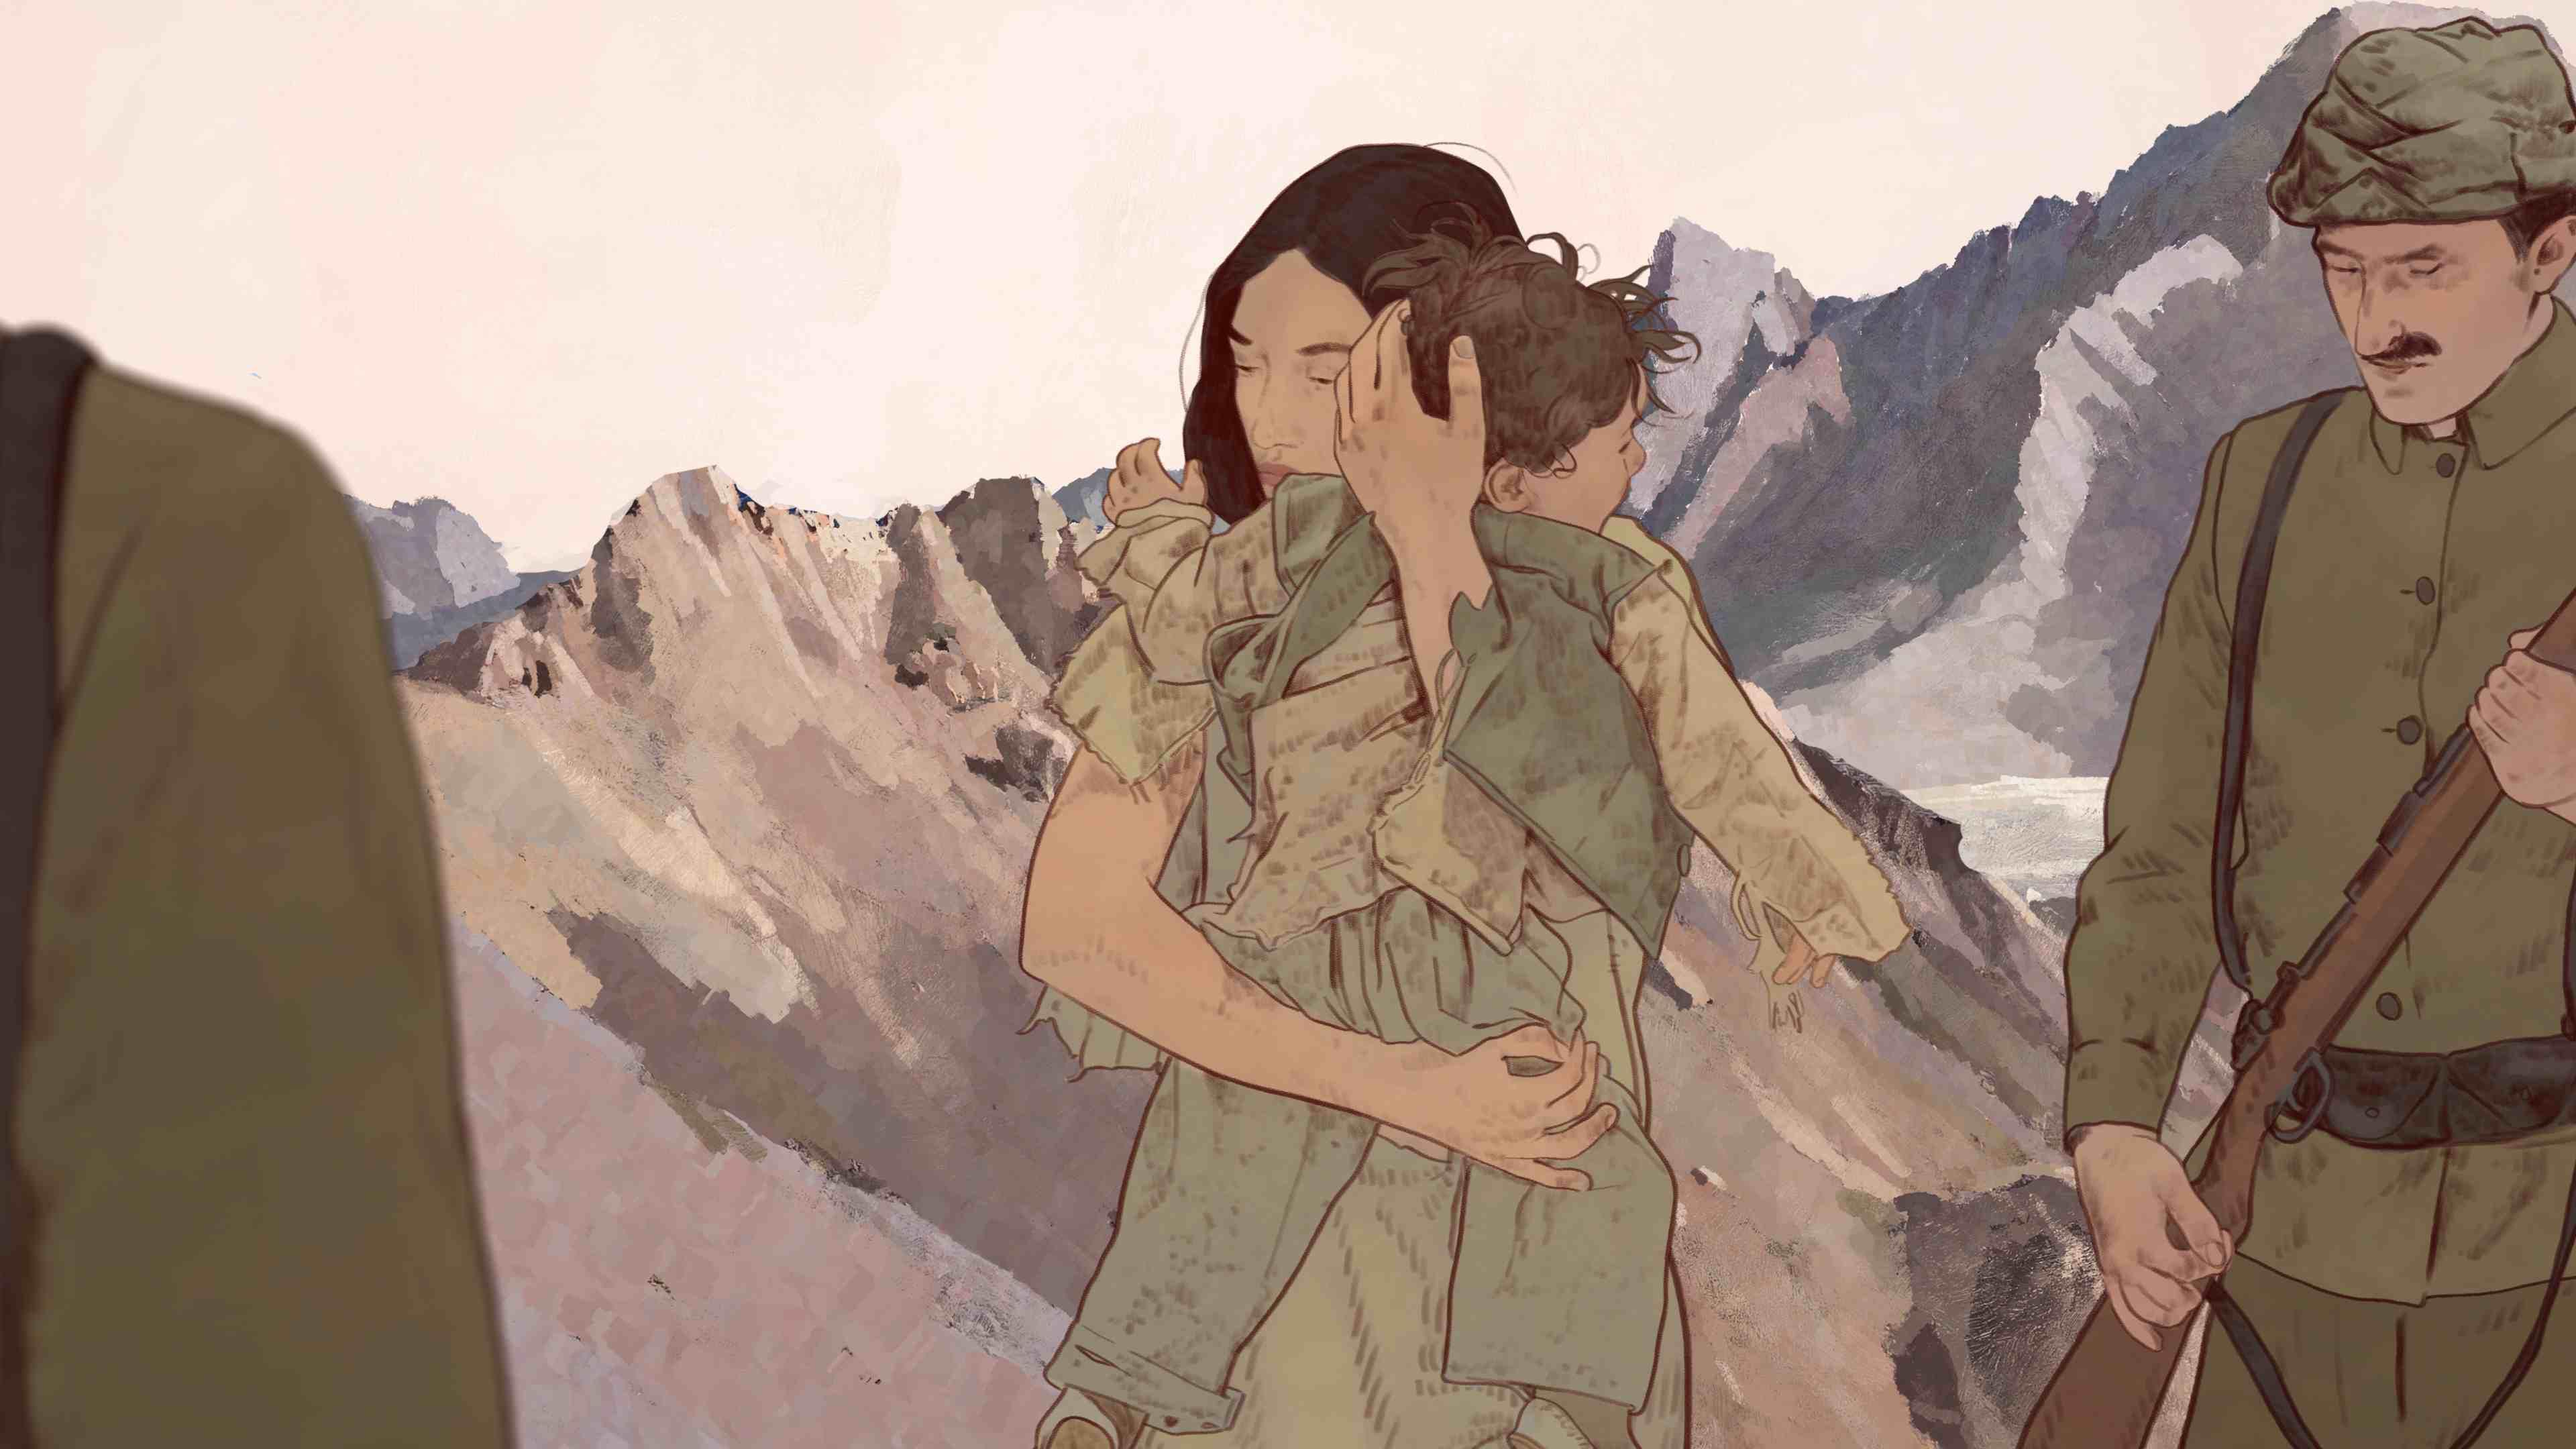 An animated drawing of a woman clutching a small child standing next to a solider in front of a desert mountain.